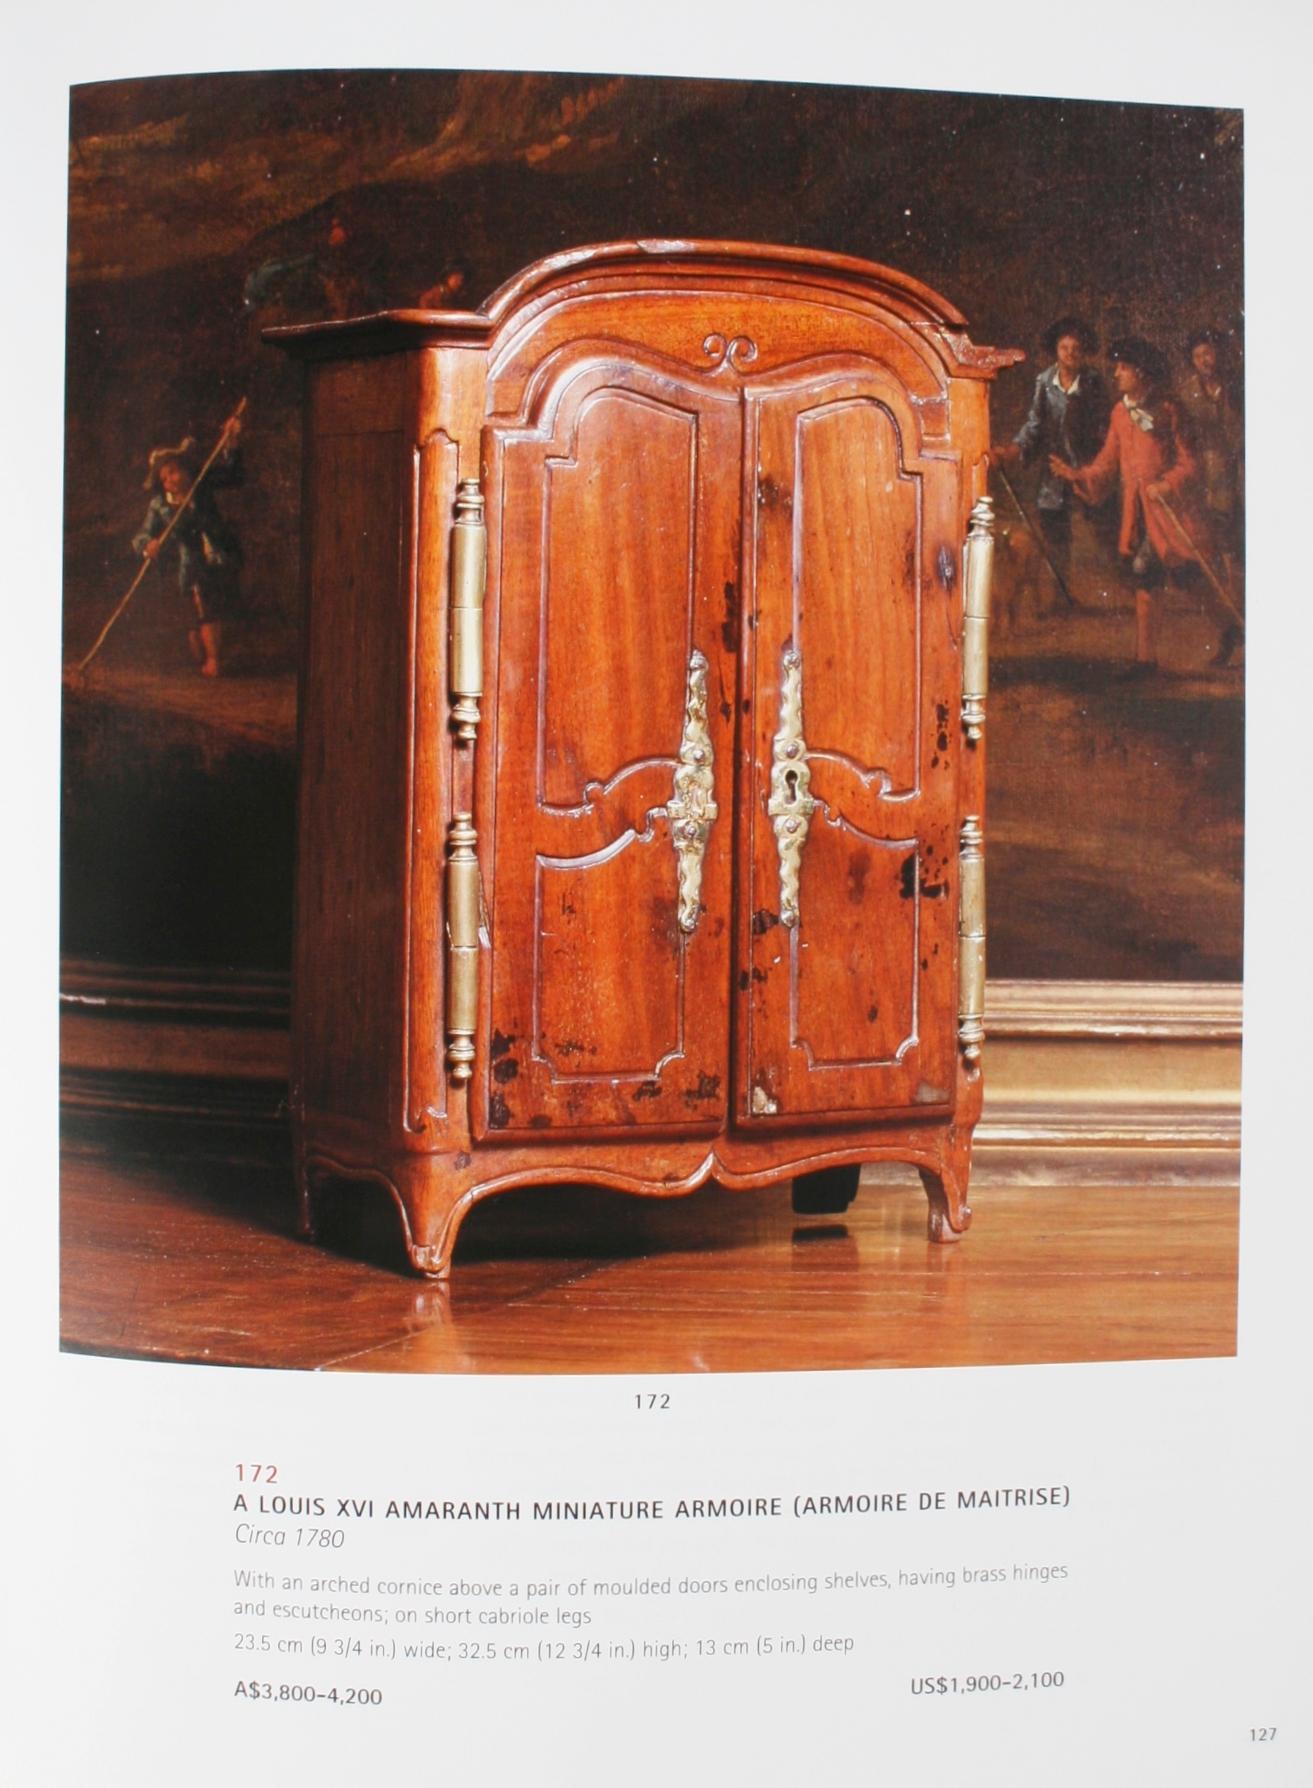 Christies avril 2002 French Furniture & Decorative Arts, a & C Fink Collections en vente 8